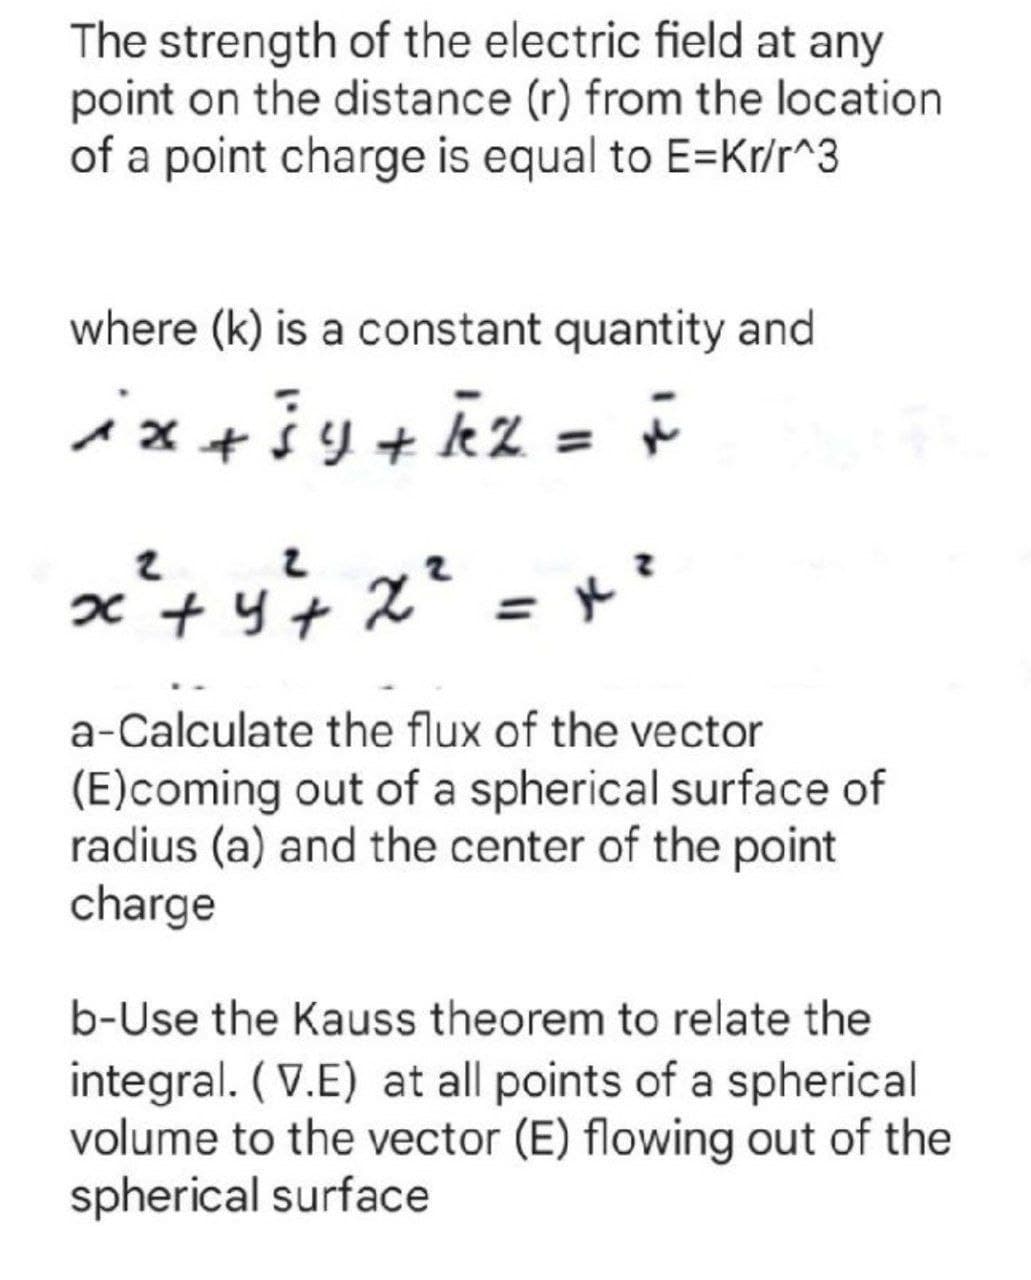 The strength of the electric field at any
point on the distance (r) from the location
of a point charge is equal to E=Kr/r^3
where (k) is a constant quantity and
ix+iy+kz =
a-Calculate the flux of the vector
(E)coming out of a spherical surface of
radius (a) and the center of the point
charge
b-Use the Kauss theorem to relate the
integral. (V.E) at all points of a spherical
volume to the vector (E) flowing out of the
spherical surface
